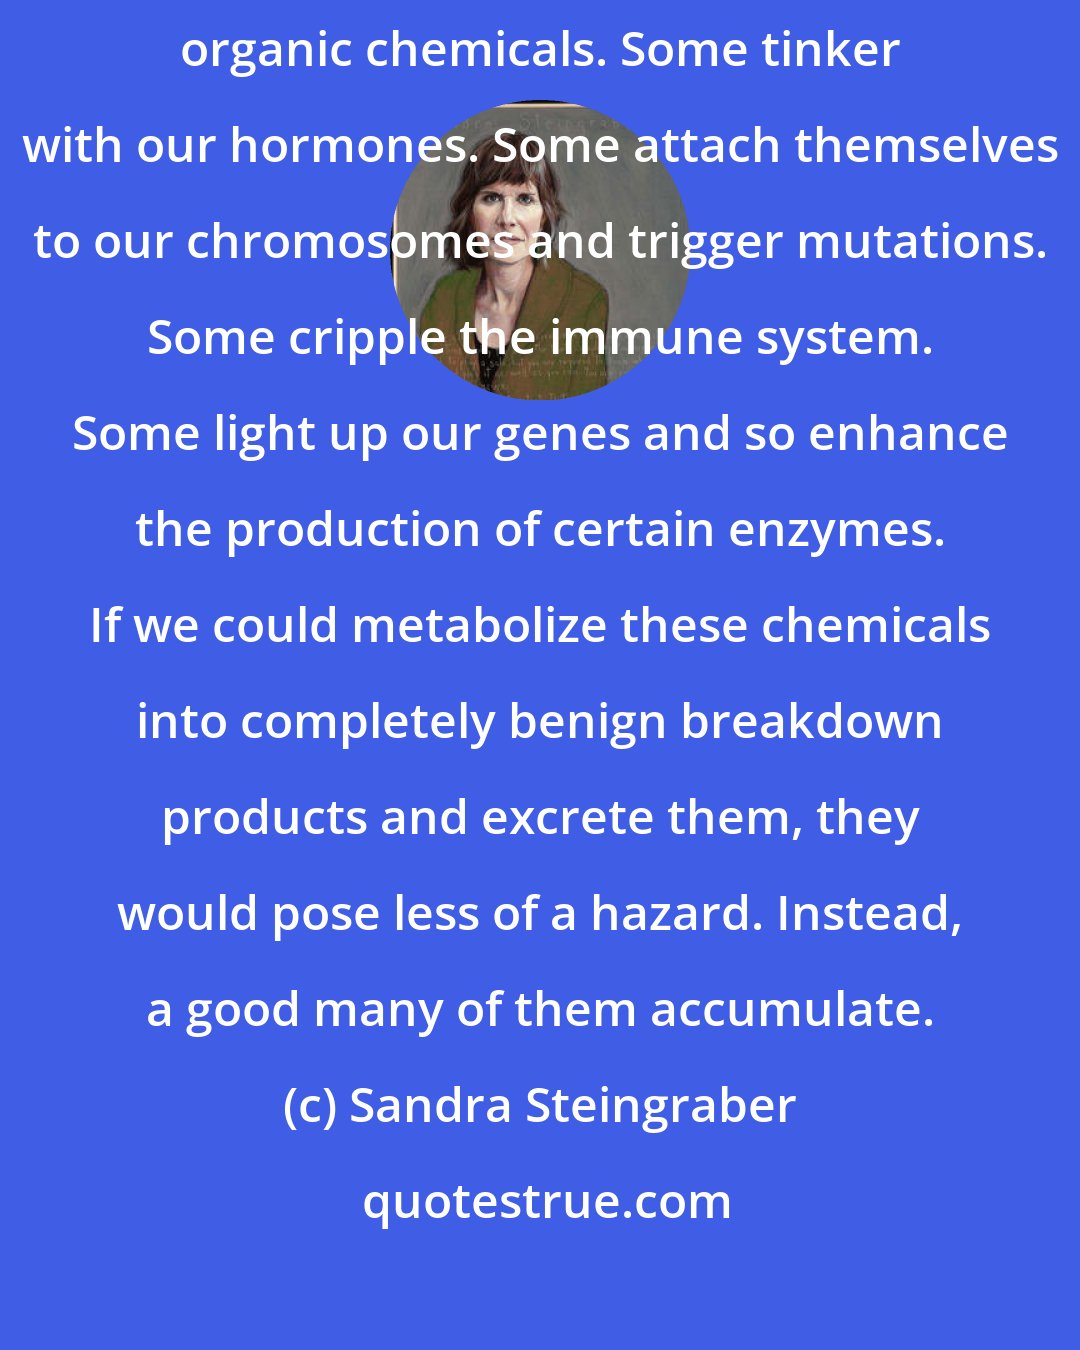 Sandra Steingraber: ... we find ourselves facing a rising tide of biologically active, synthetic organic chemicals. Some tinker with our hormones. Some attach themselves to our chromosomes and trigger mutations. Some cripple the immune system. Some light up our genes and so enhance the production of certain enzymes. If we could metabolize these chemicals into completely benign breakdown products and excrete them, they would pose less of a hazard. Instead, a good many of them accumulate.